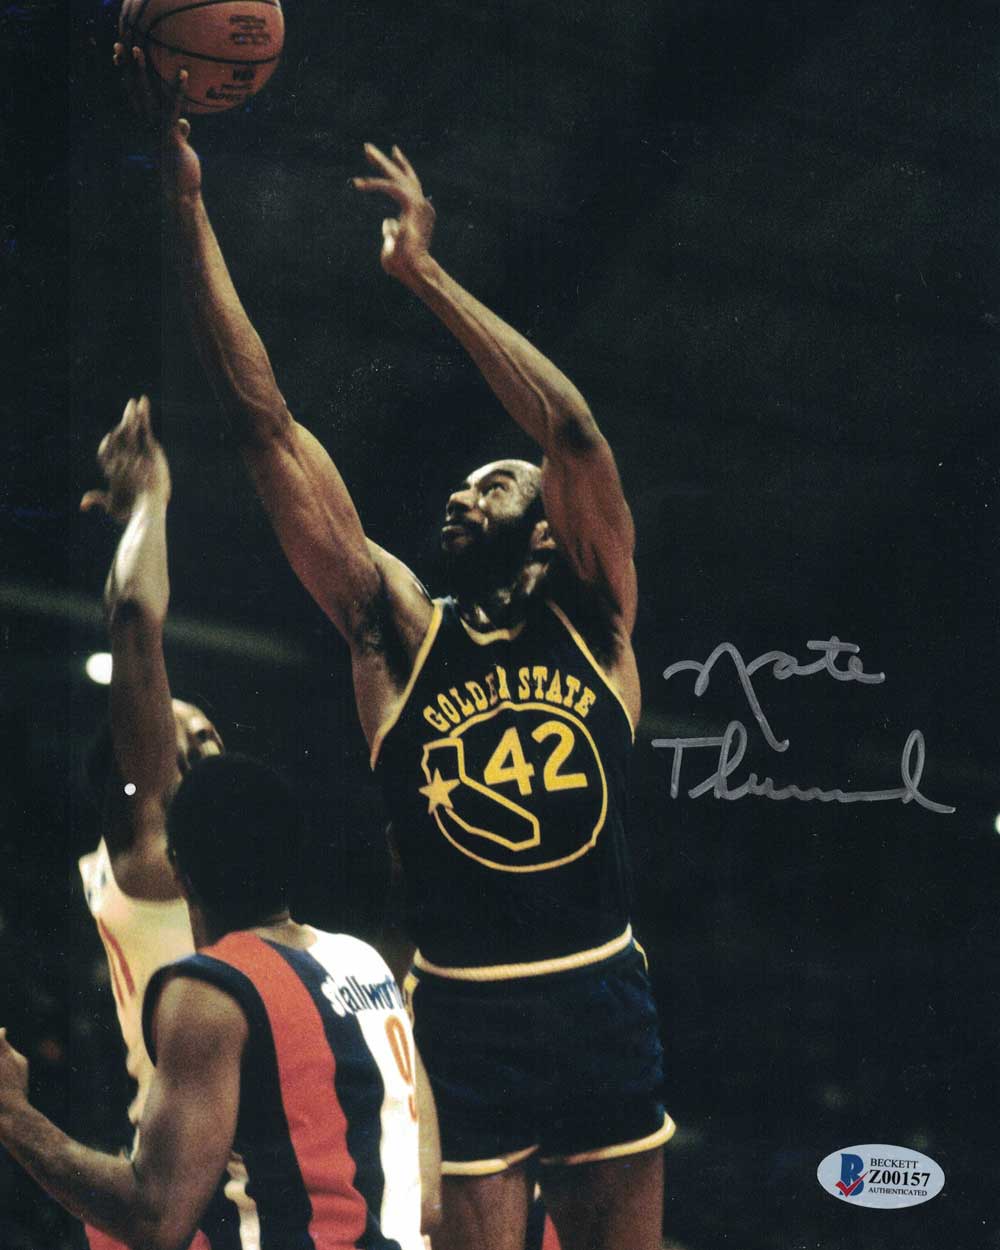 Nate Thurmand Autographed/Signed Golden State Warriors 8x10 Photo BAS 31108